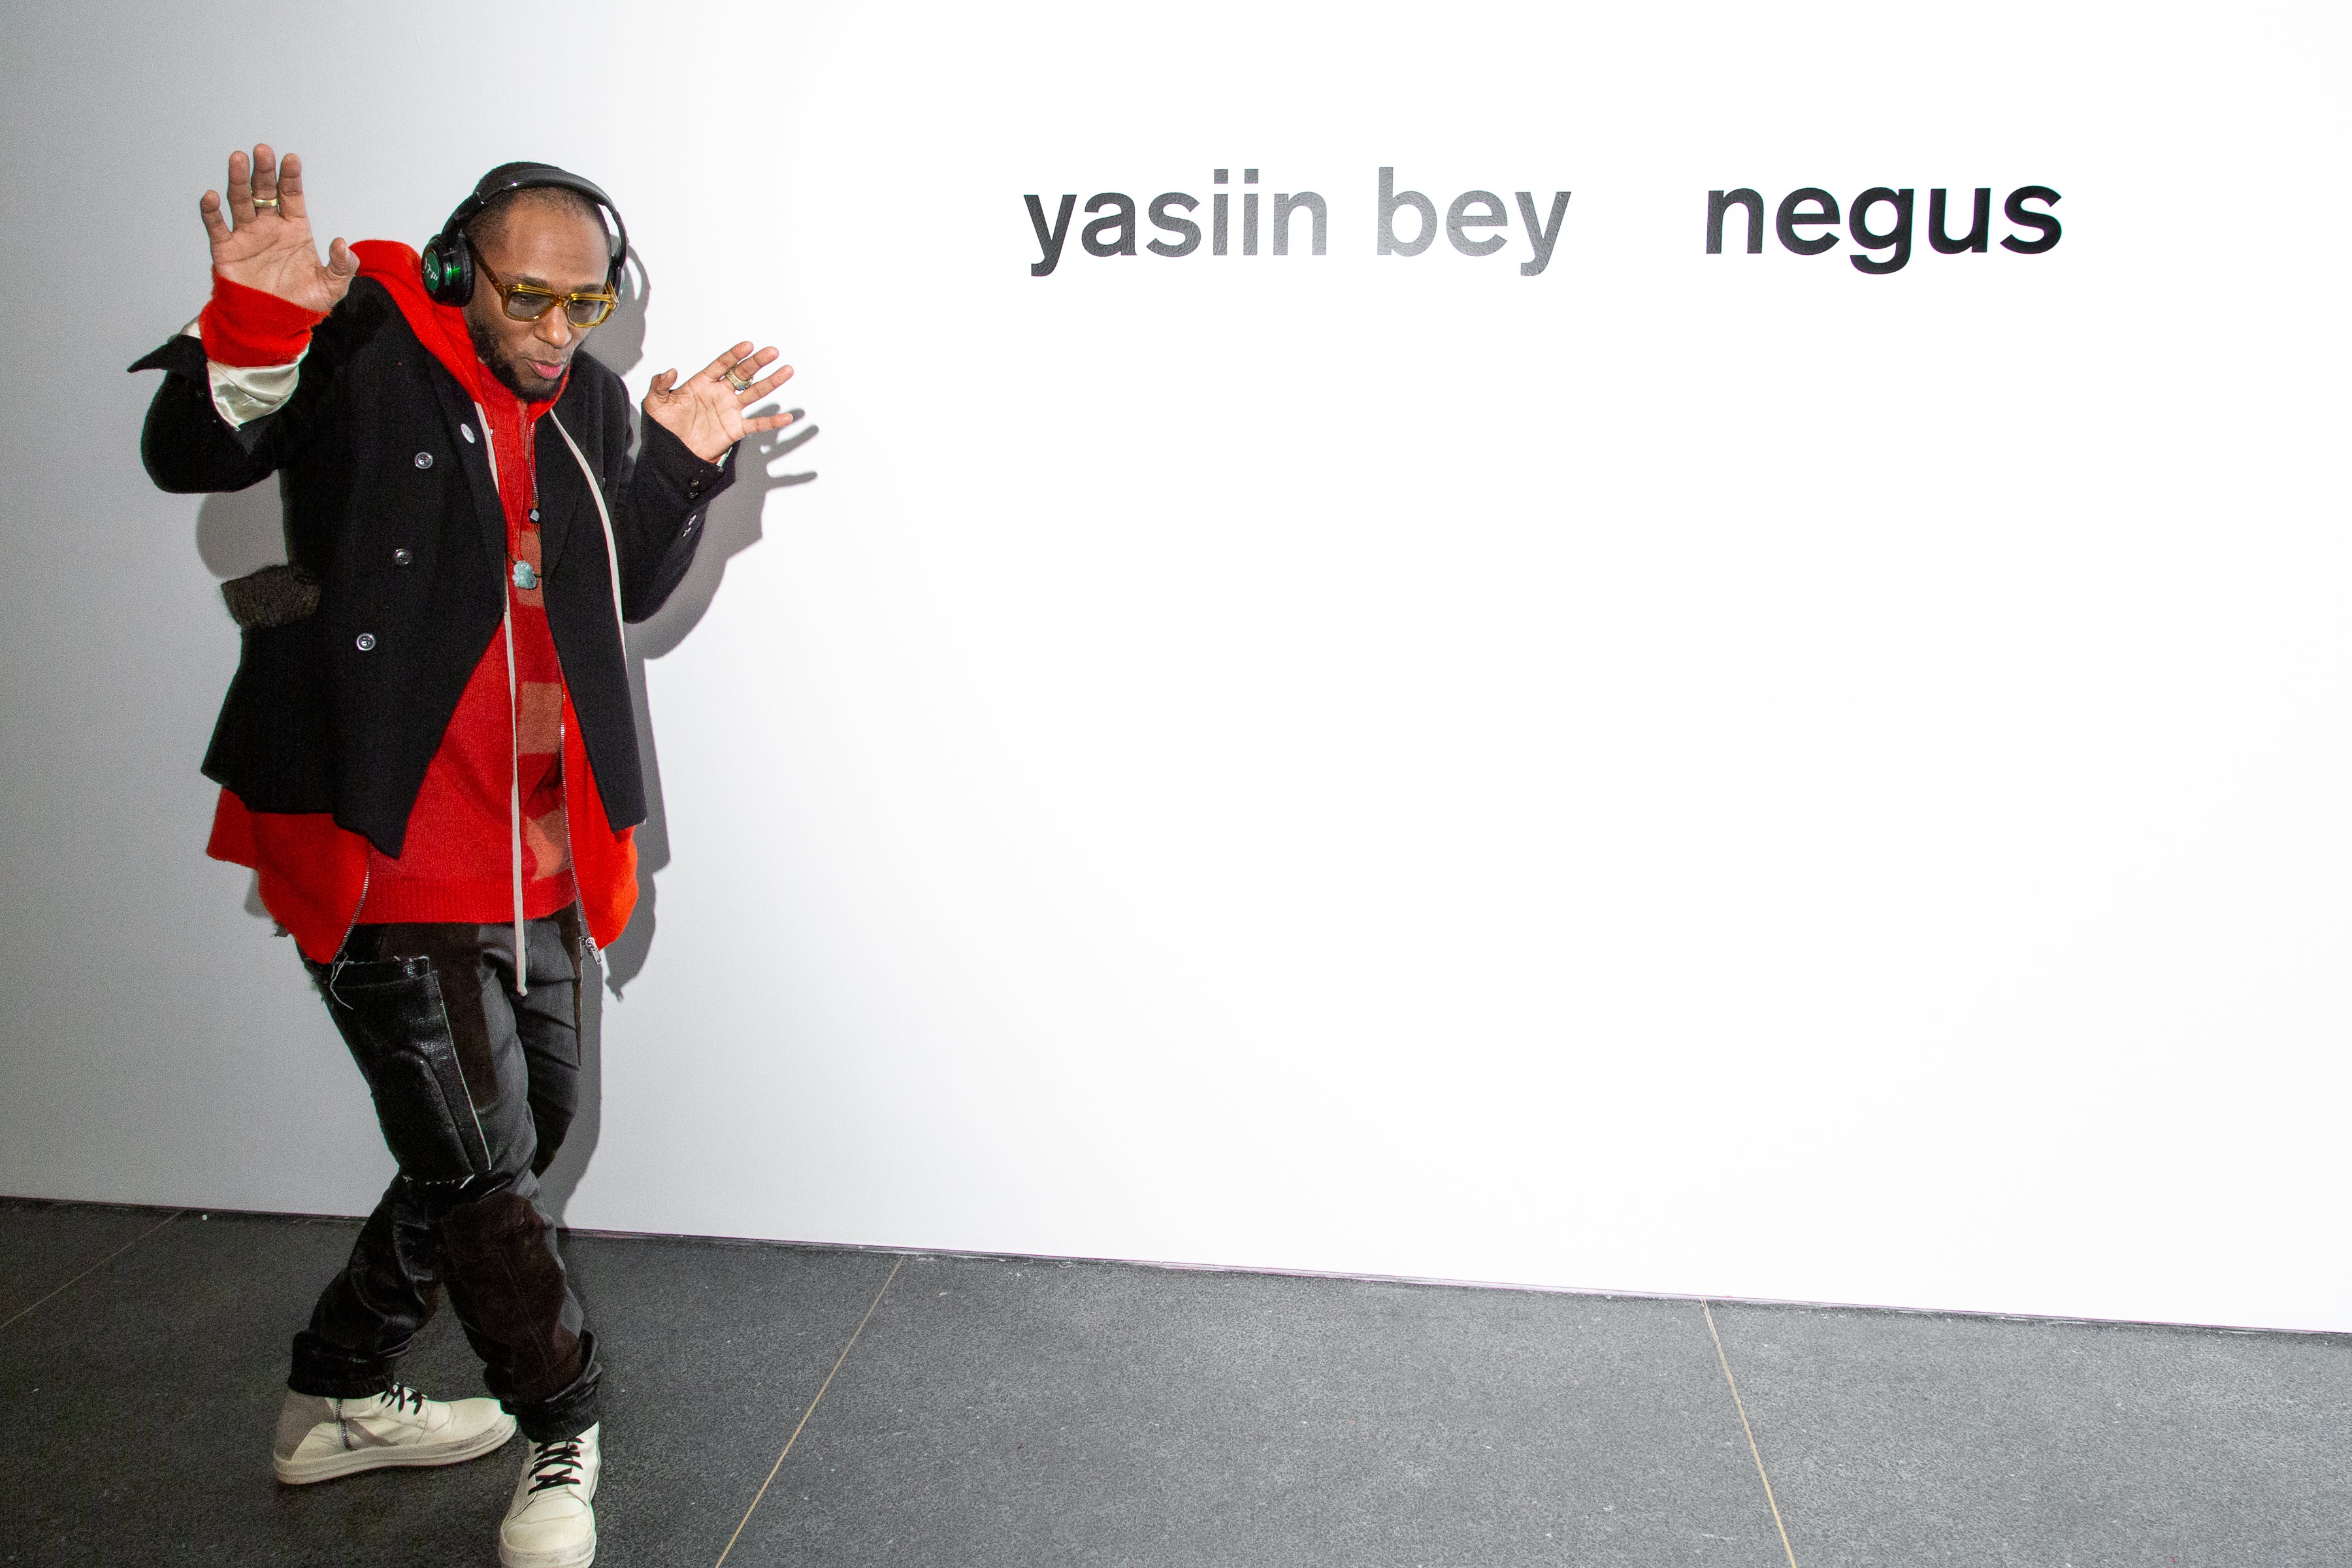 Brooklyn Museum — “Staring into space. Focus.” yasiin bey stopped by